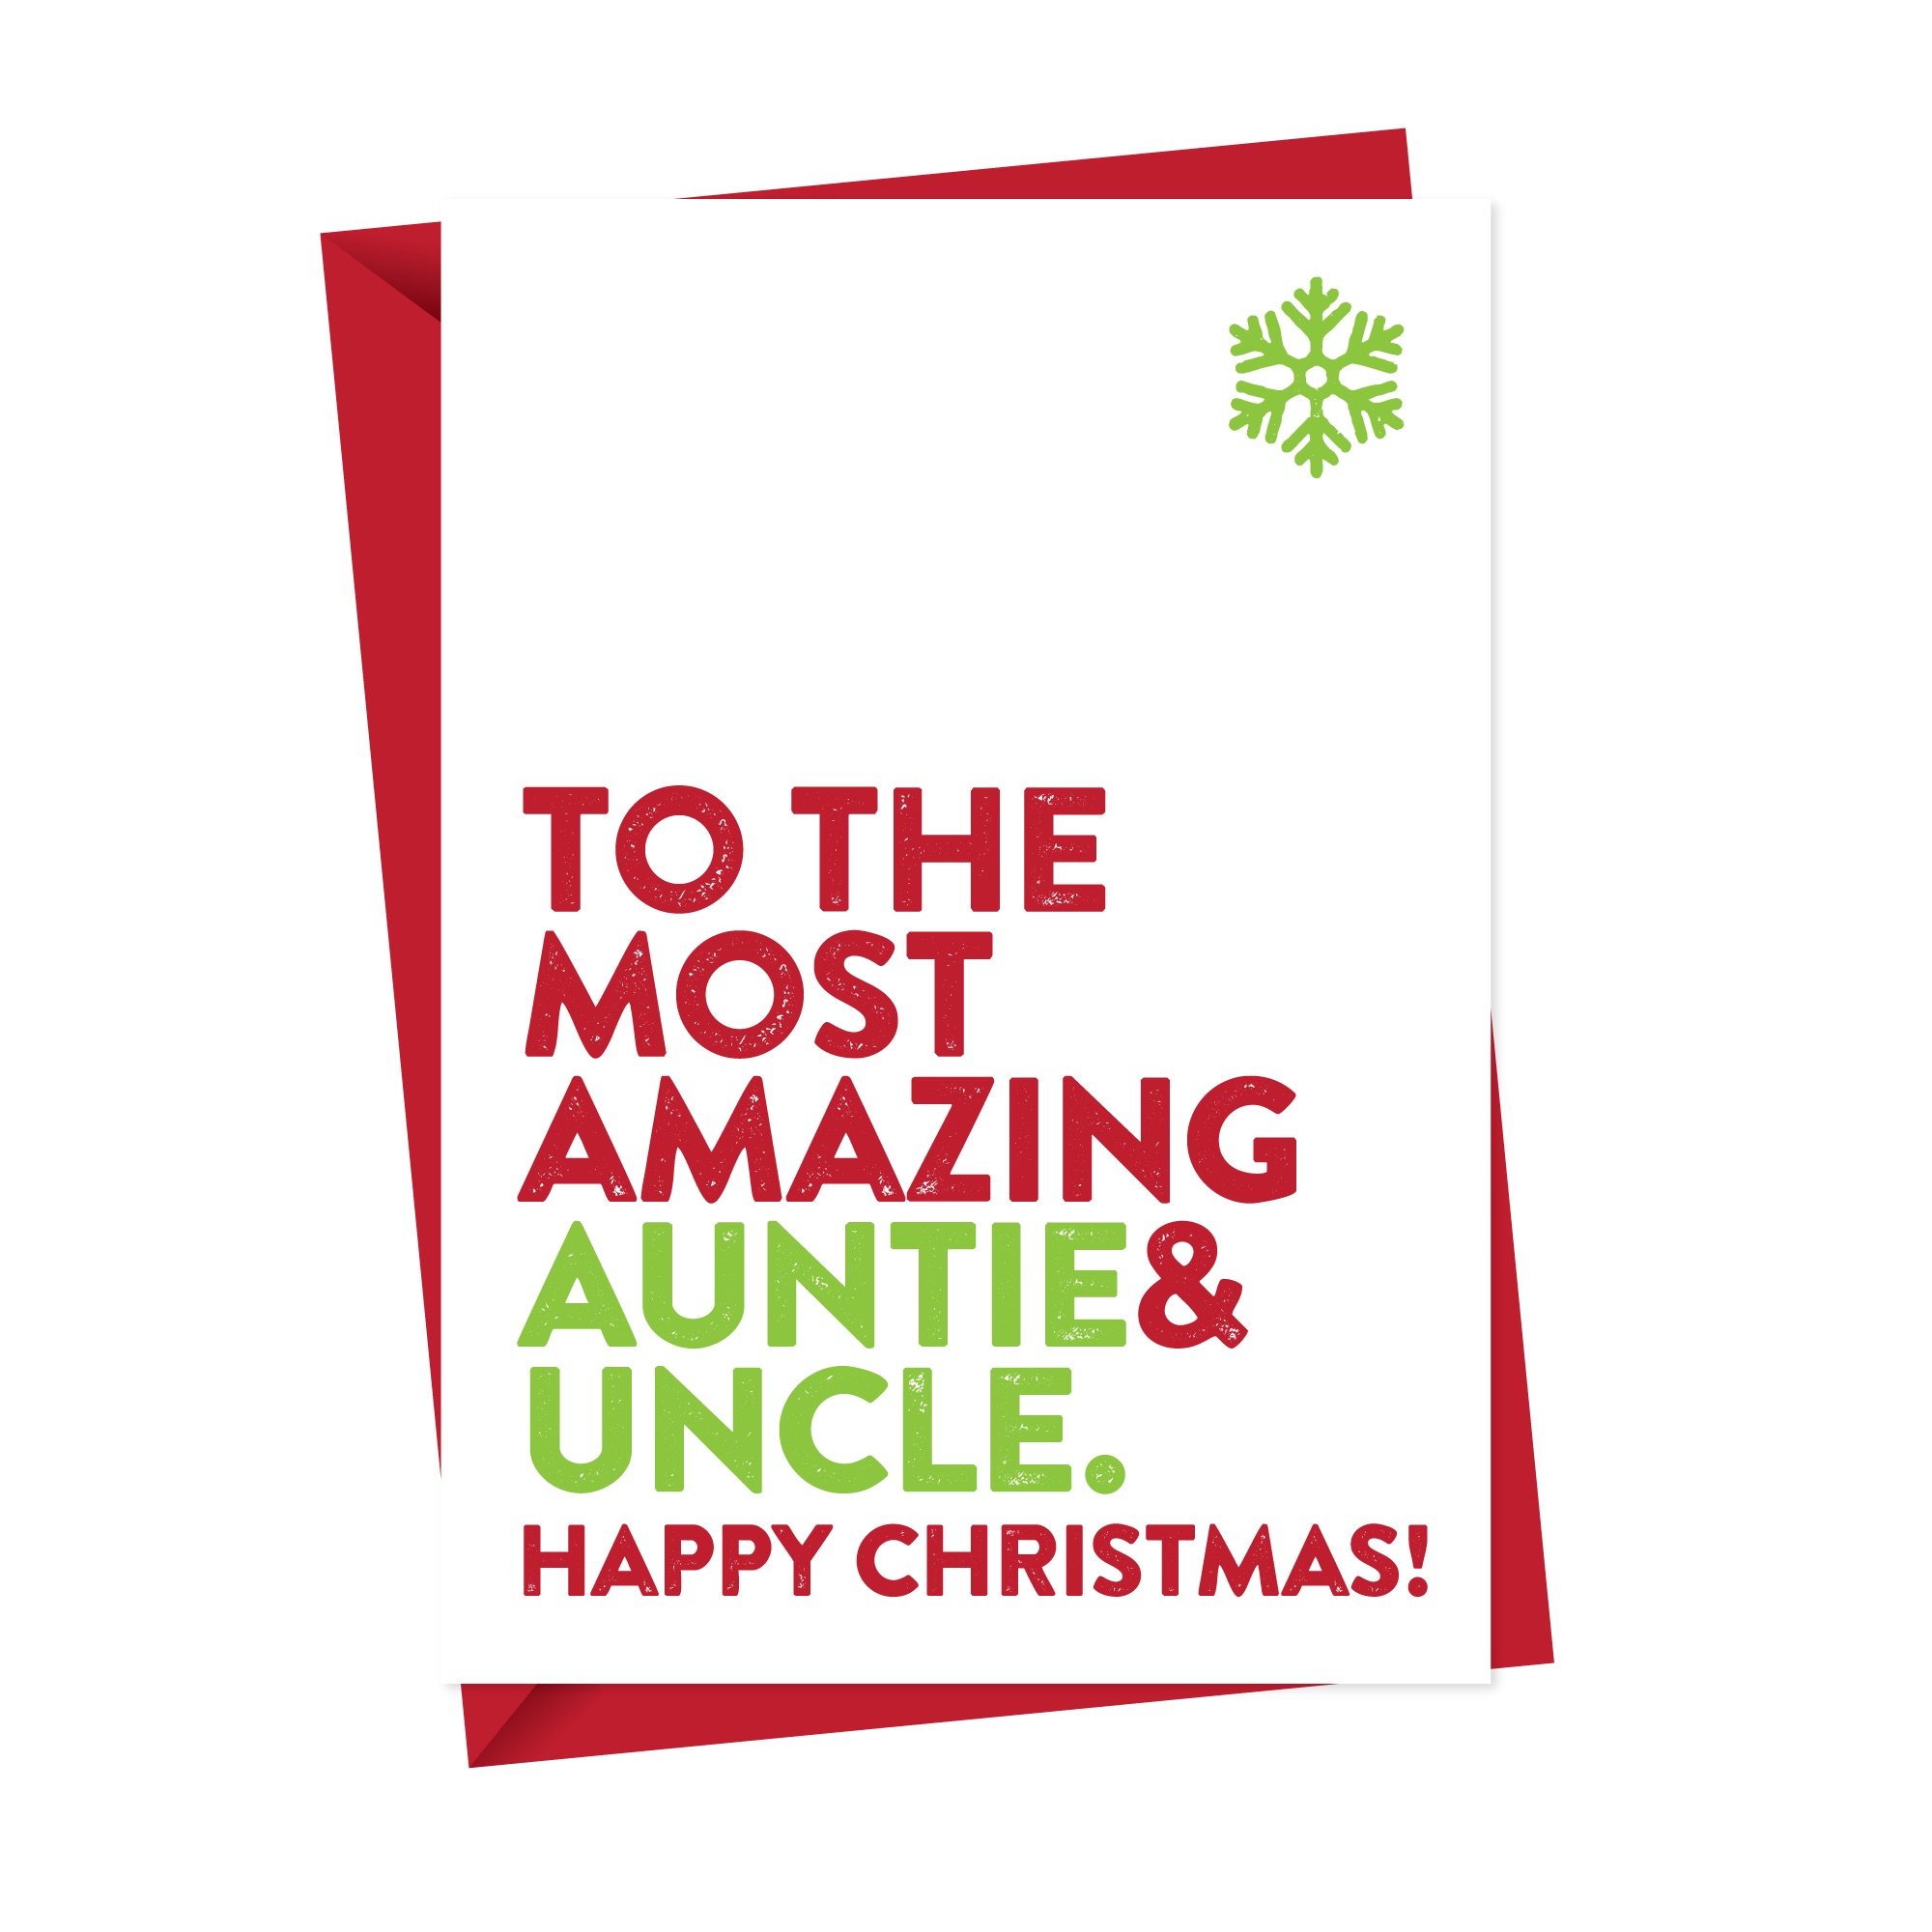 Most Amazing Aunt & Uncle Christmas Card